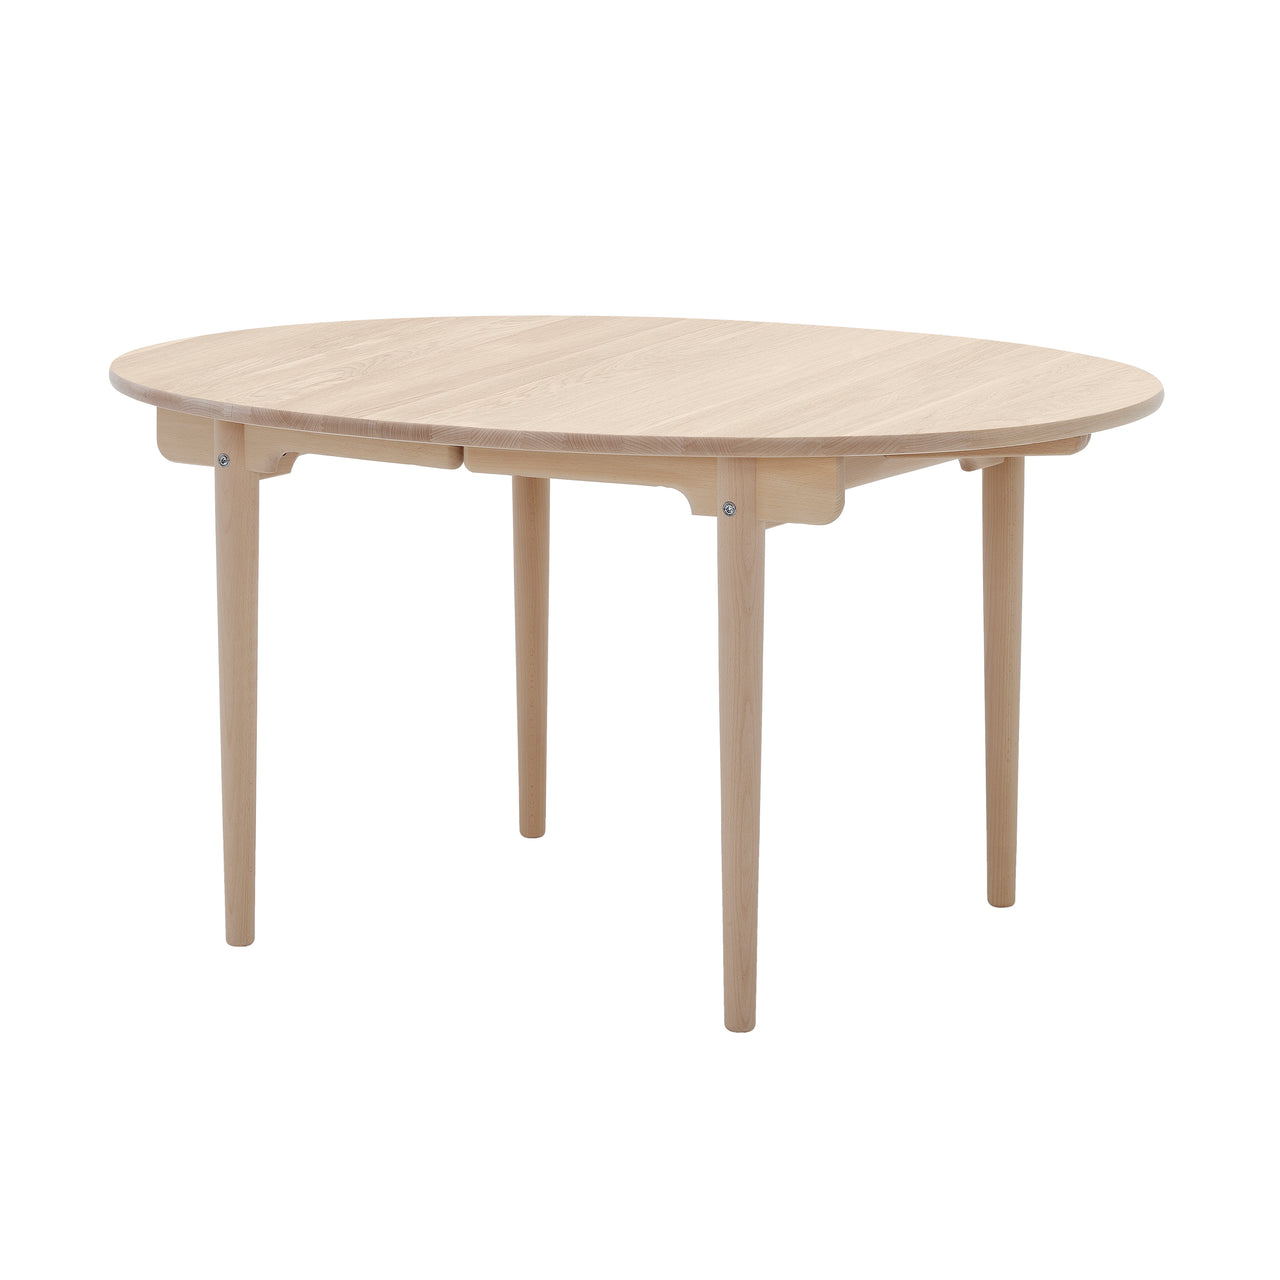 CH337 Dining Table: Soaped Oak + Without Leaf